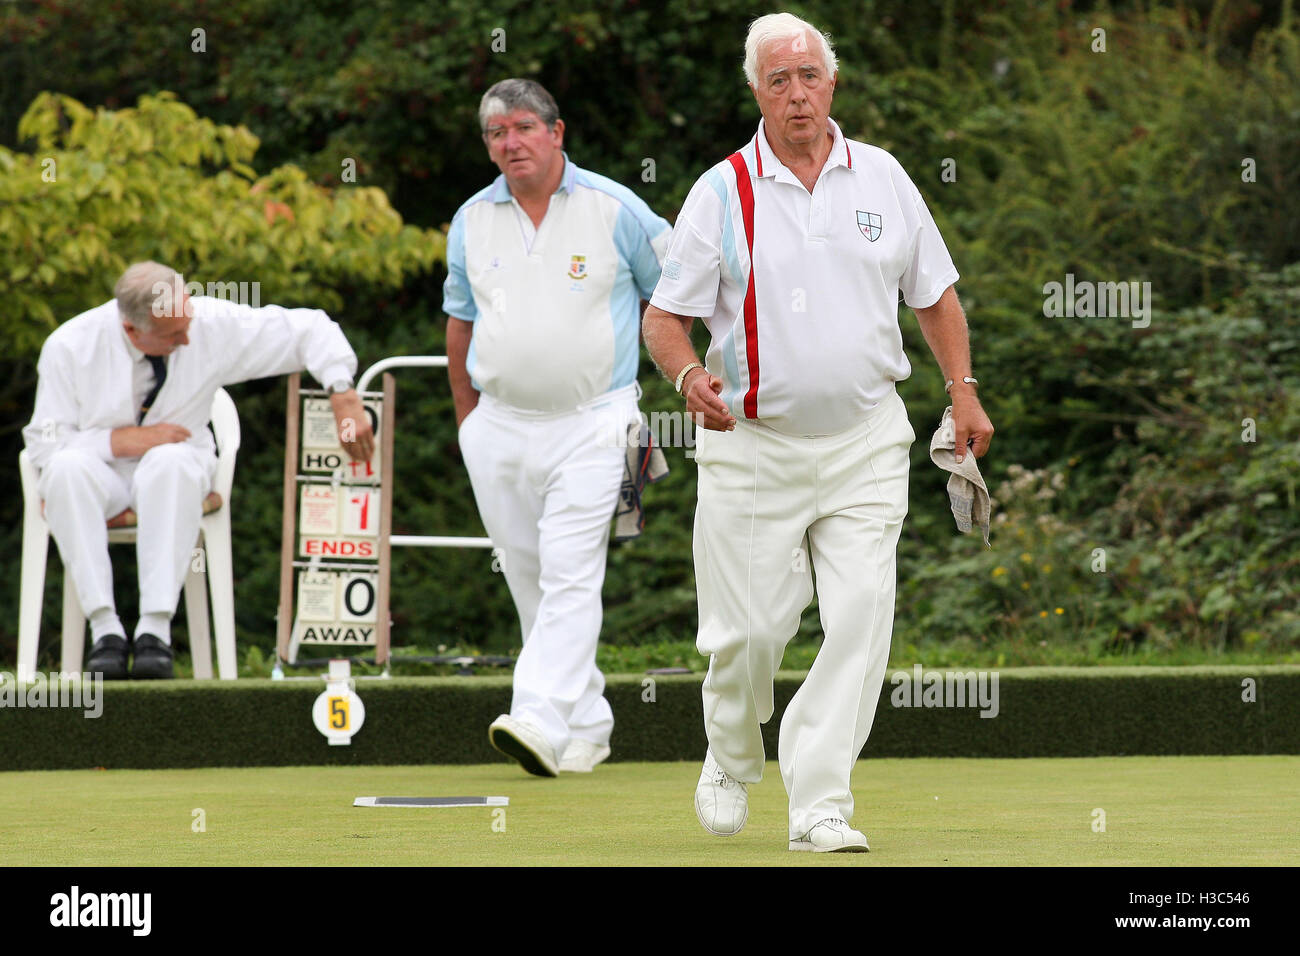 F Wasmuth, R Waller (Brentwood BC, light blue sleeves) vs L Goodman, D Woodhall (Rainham BC) - Pairs Trophy - Romford & District Bowls Association Finals Day at Harold Hill Bowls Club, Broxhill Centre - 05/09/10 Stock Photo